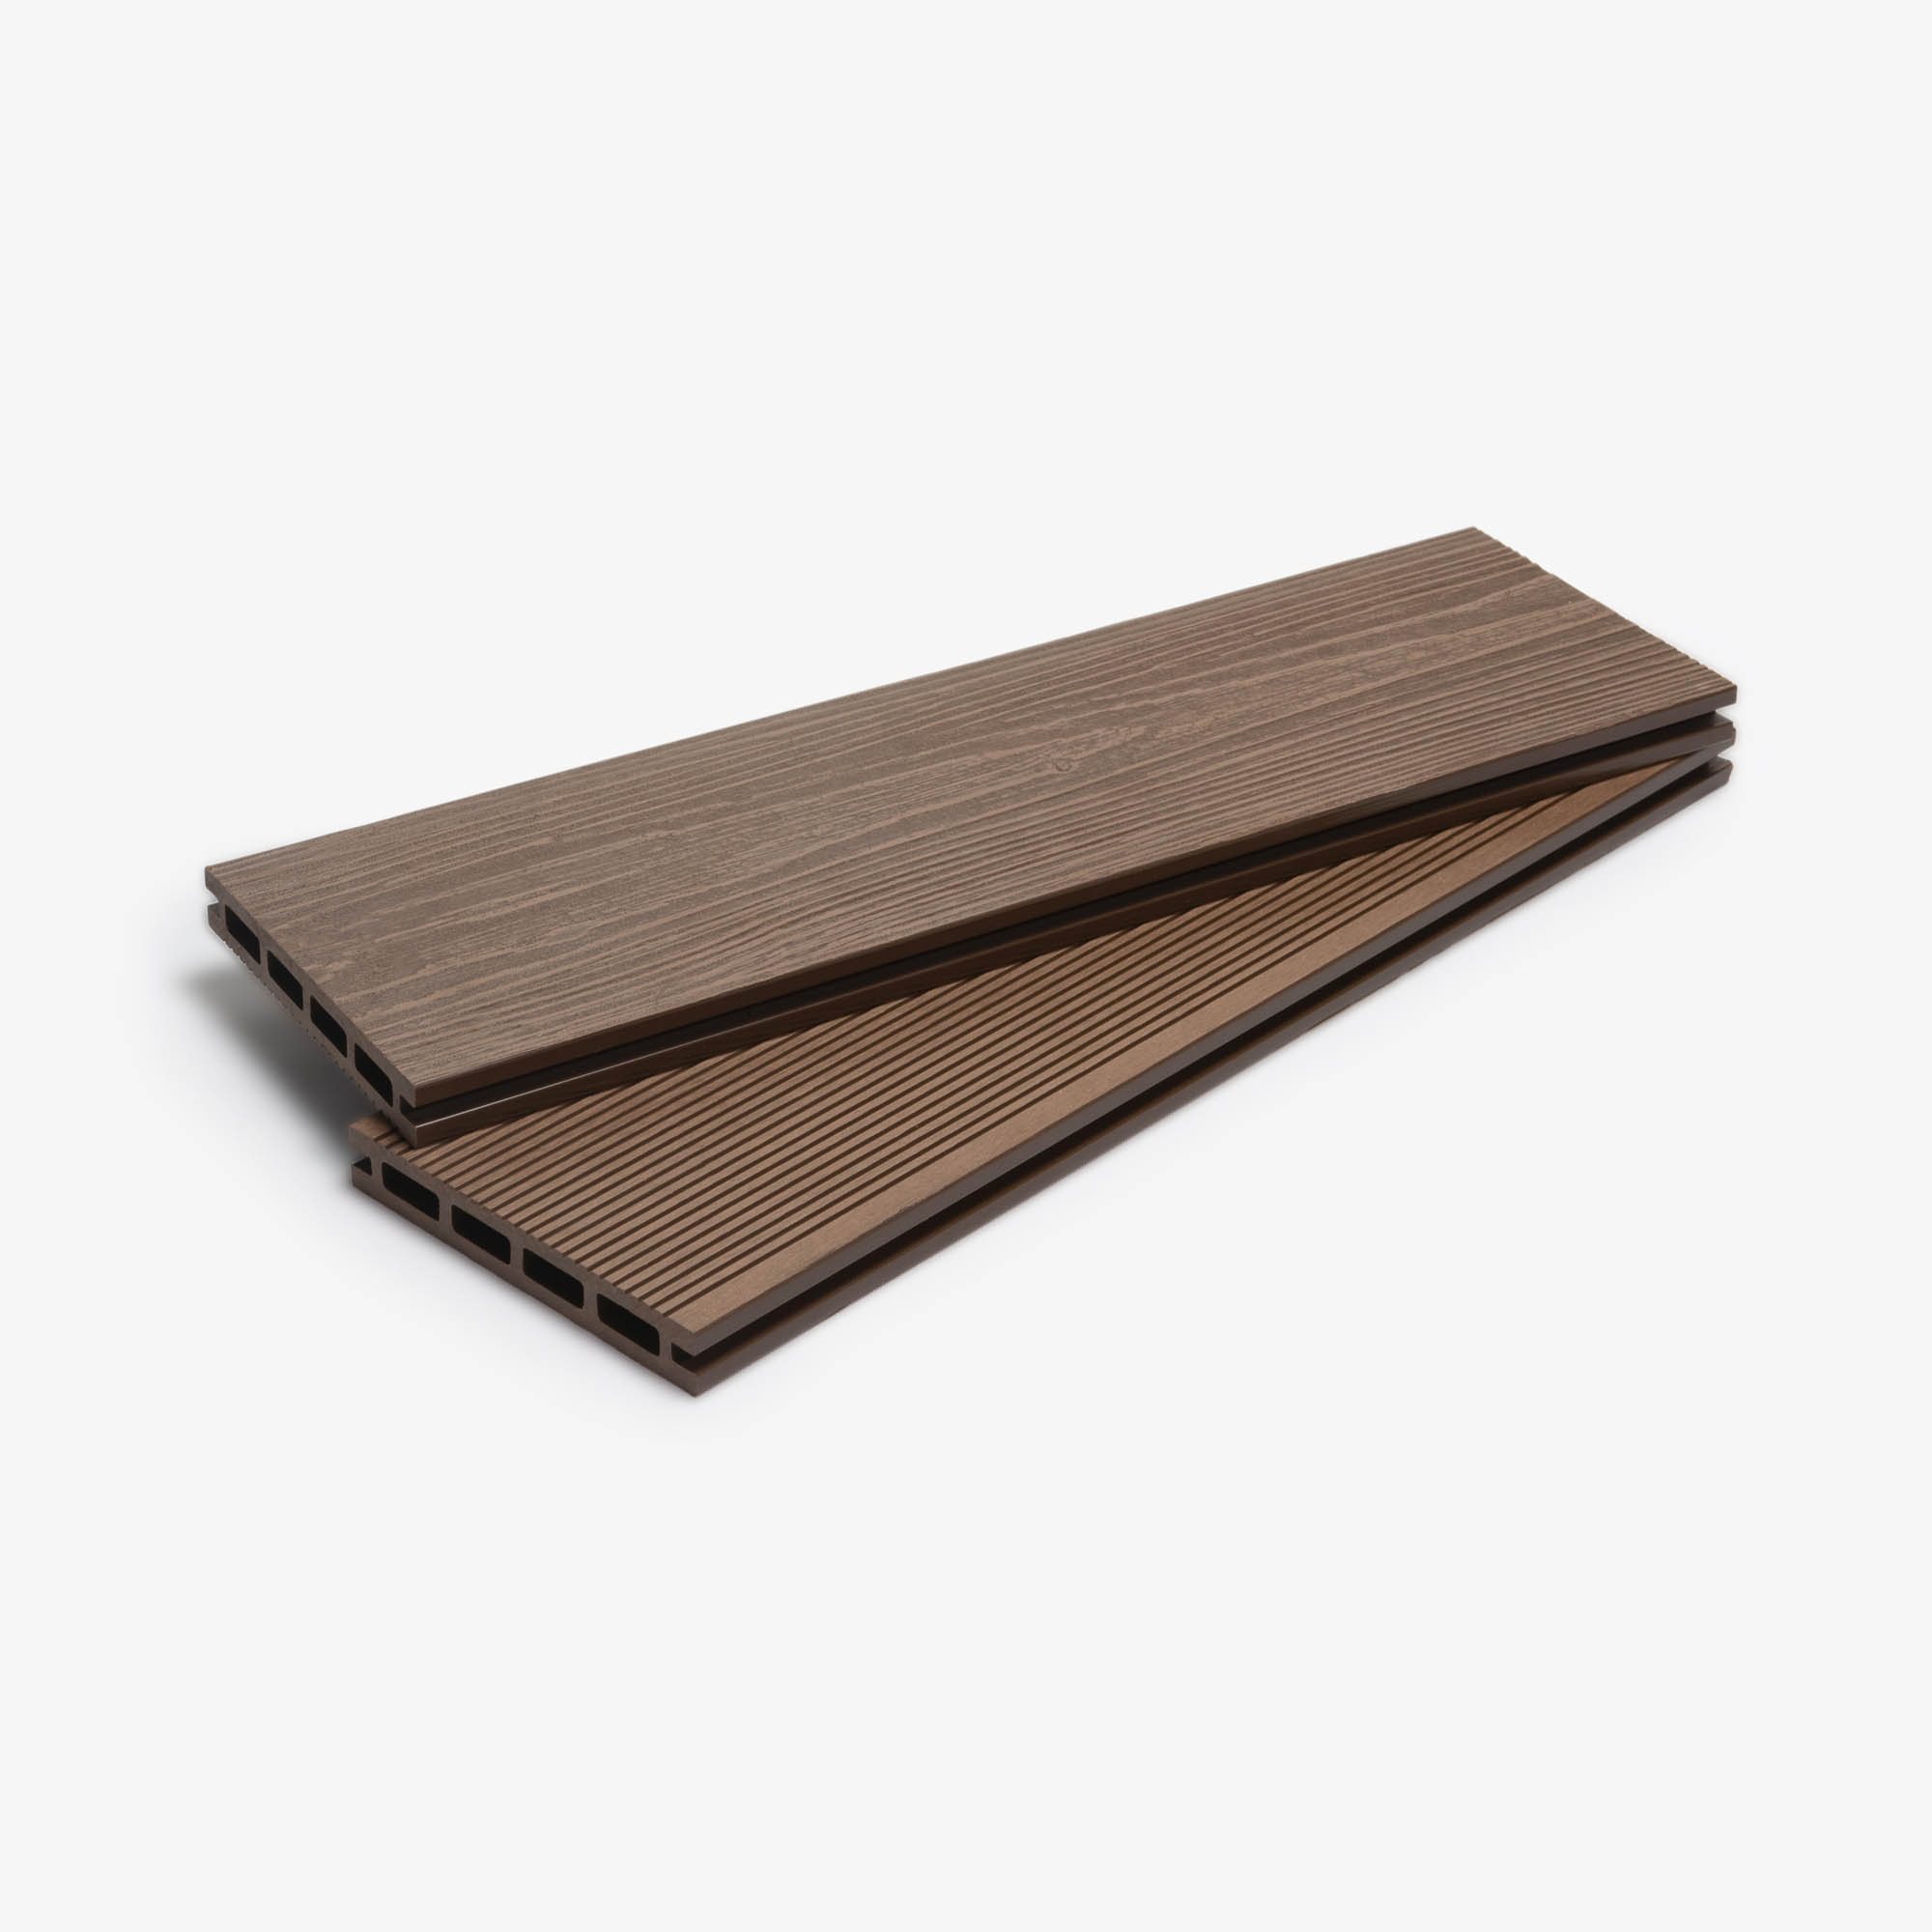 EnviroBuild launches ‘game-changing’ new decking product @ENVIROBUILDcom